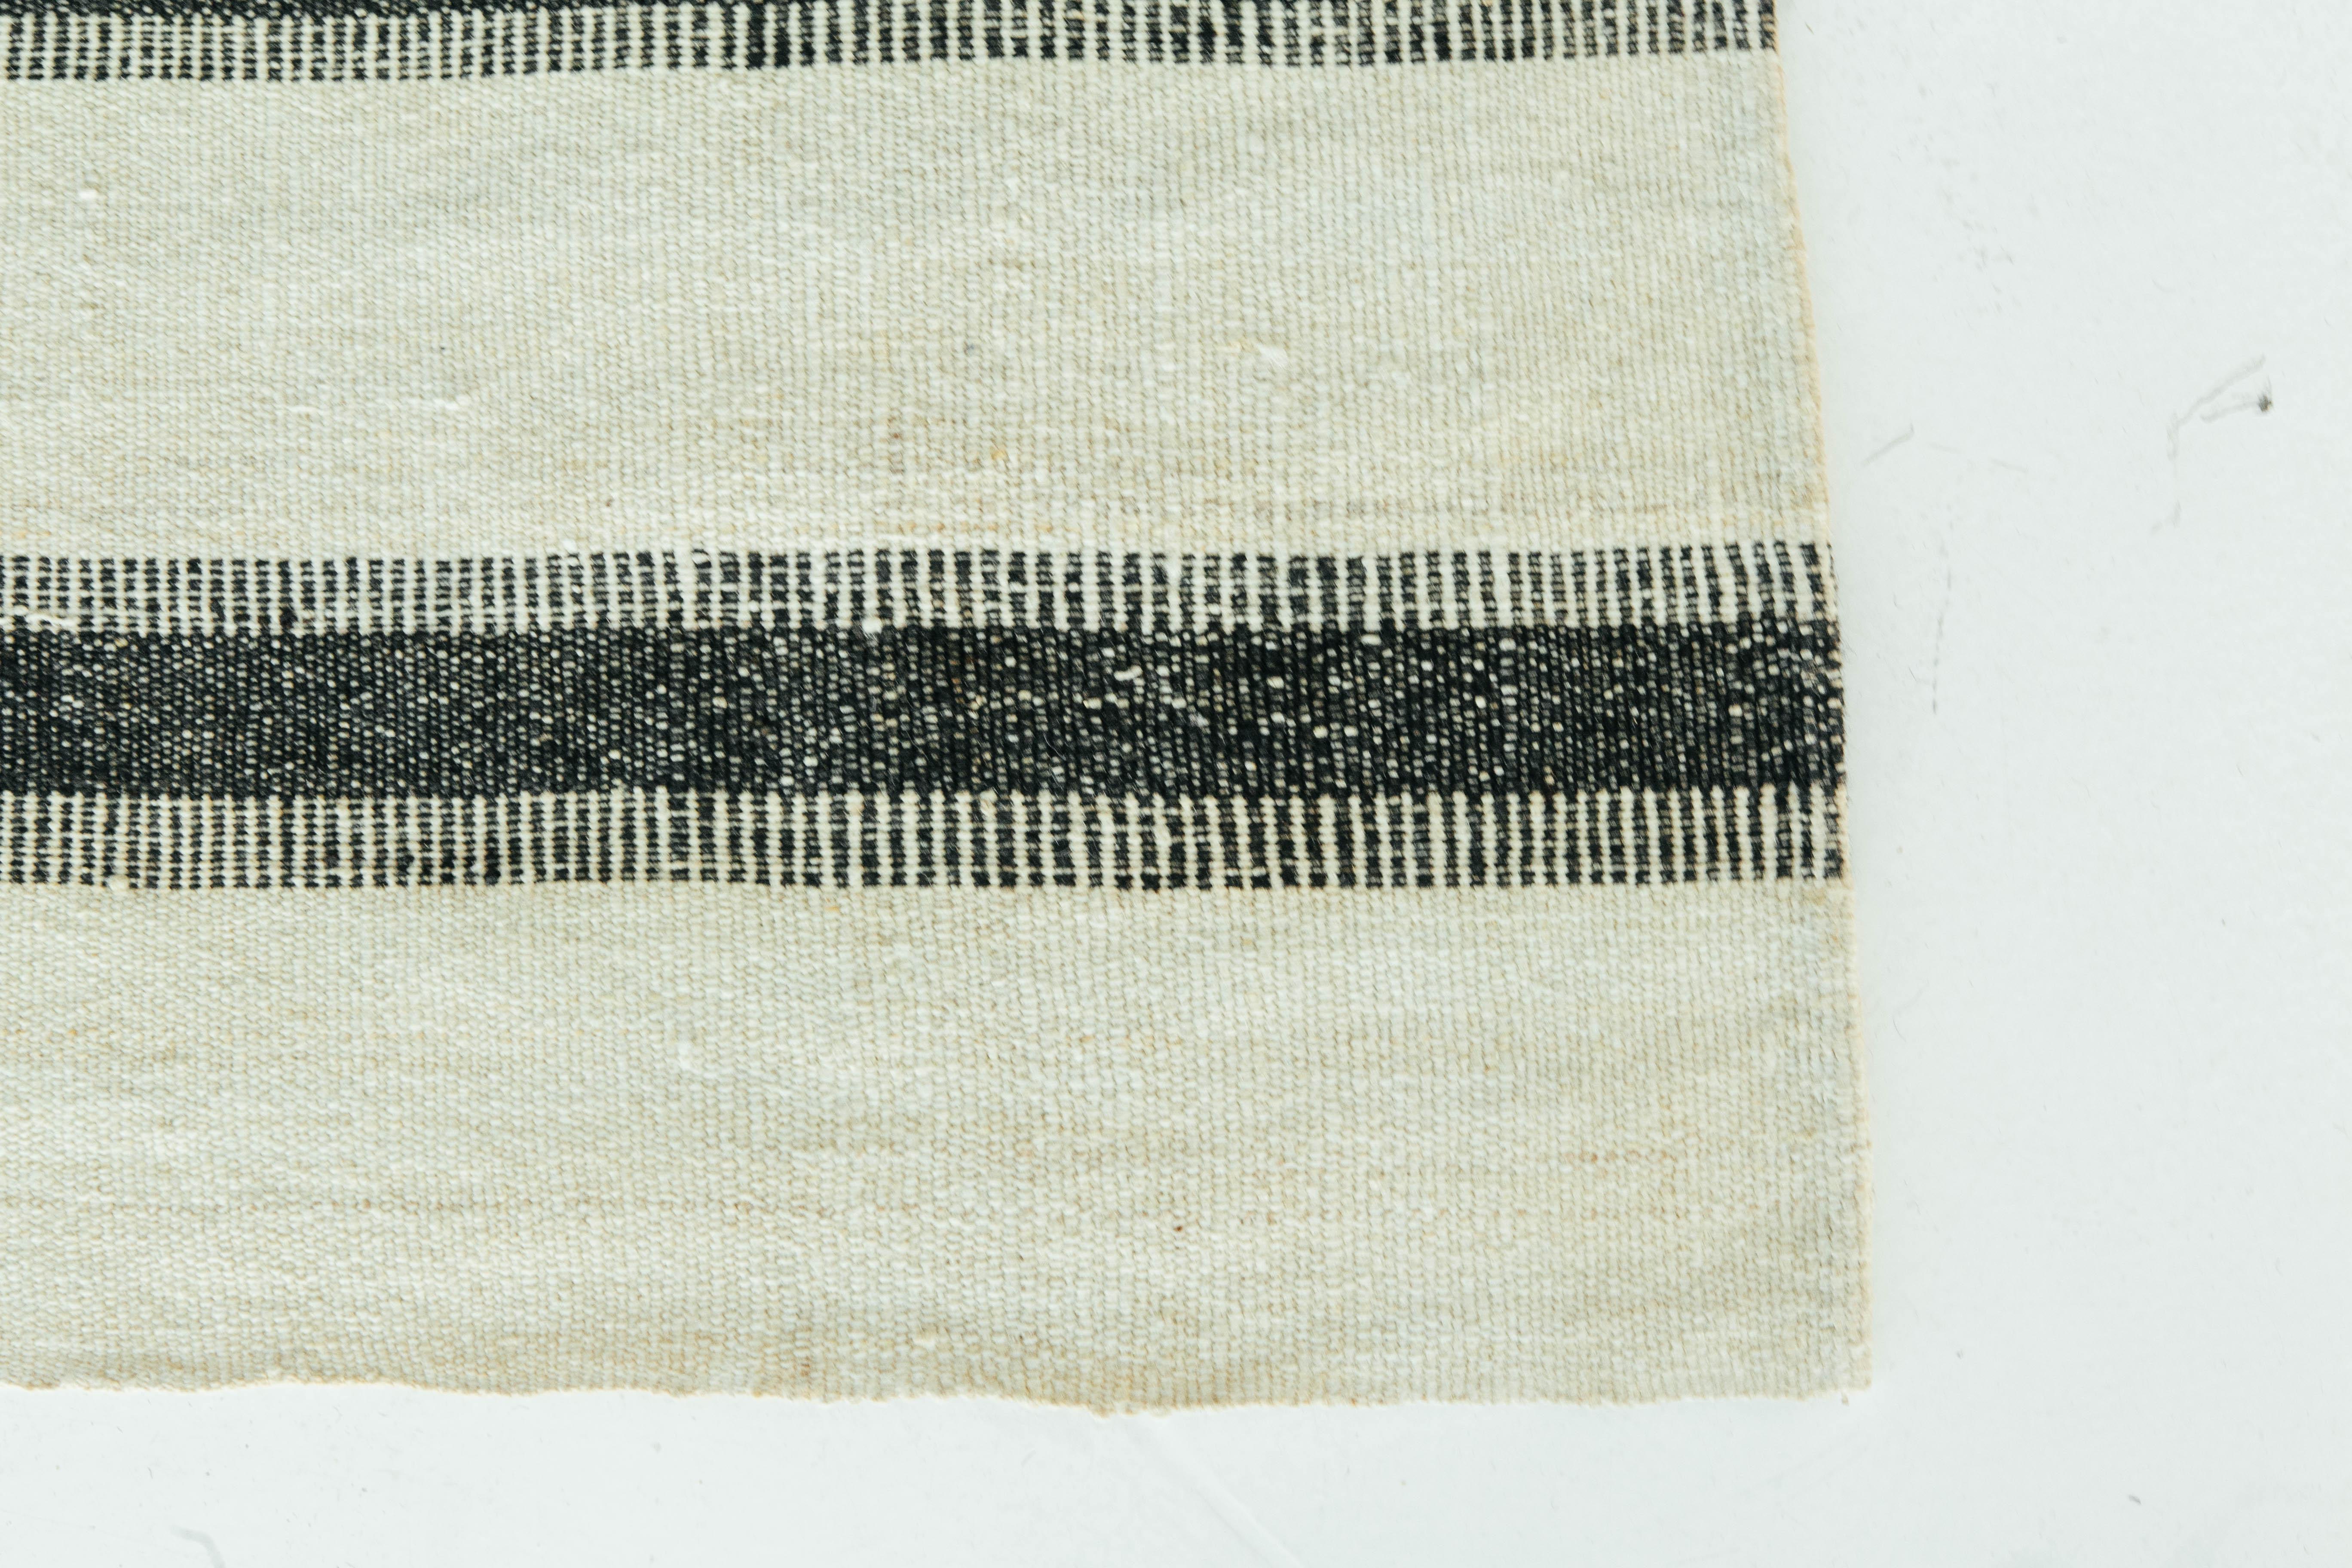 This Persian Jejim Kilim is a banded flat weave with alternating dark brown and ivory colors. The stripes have a unique toothing pattern that adds even more character. Persian flatweaves are made up of some of the best wool and weaved exceptionally